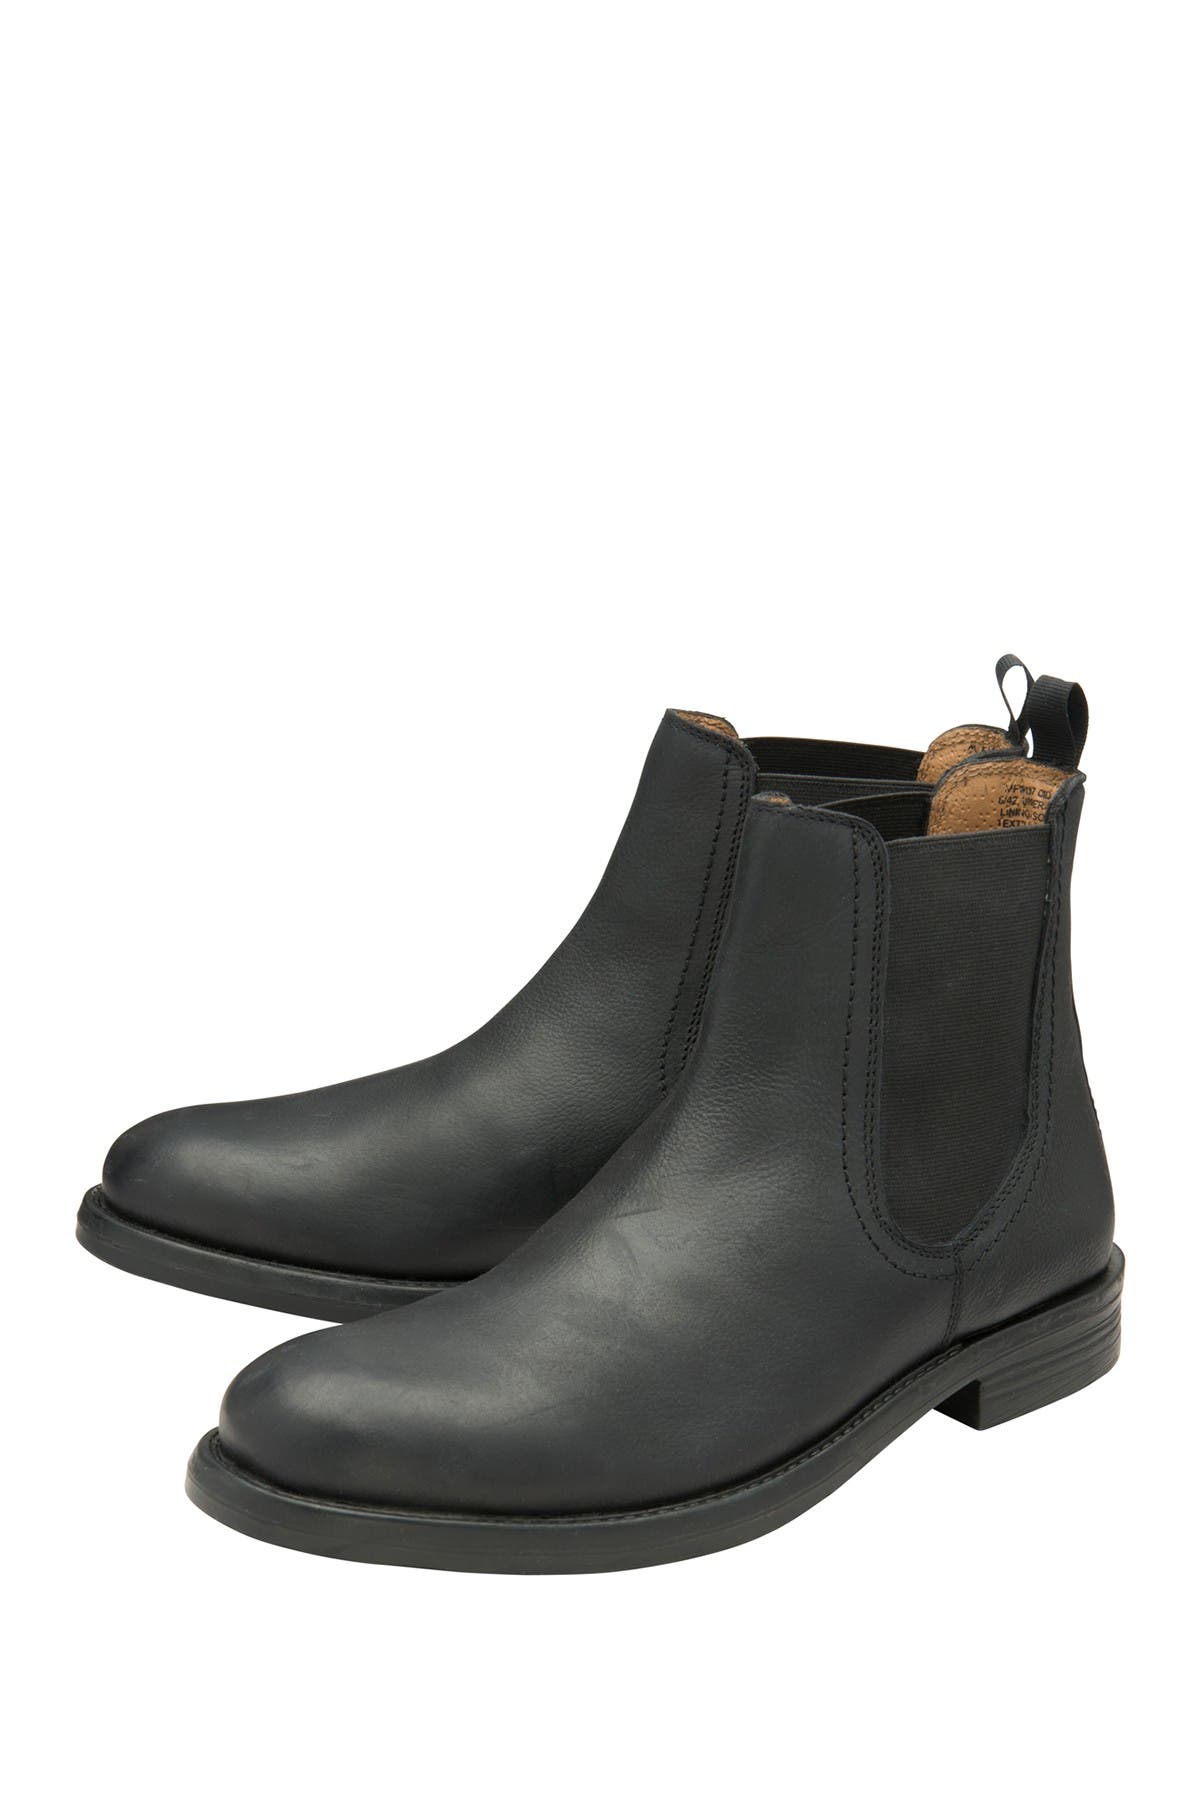 Frank Wright | Cid Leather Chelsea Boot 